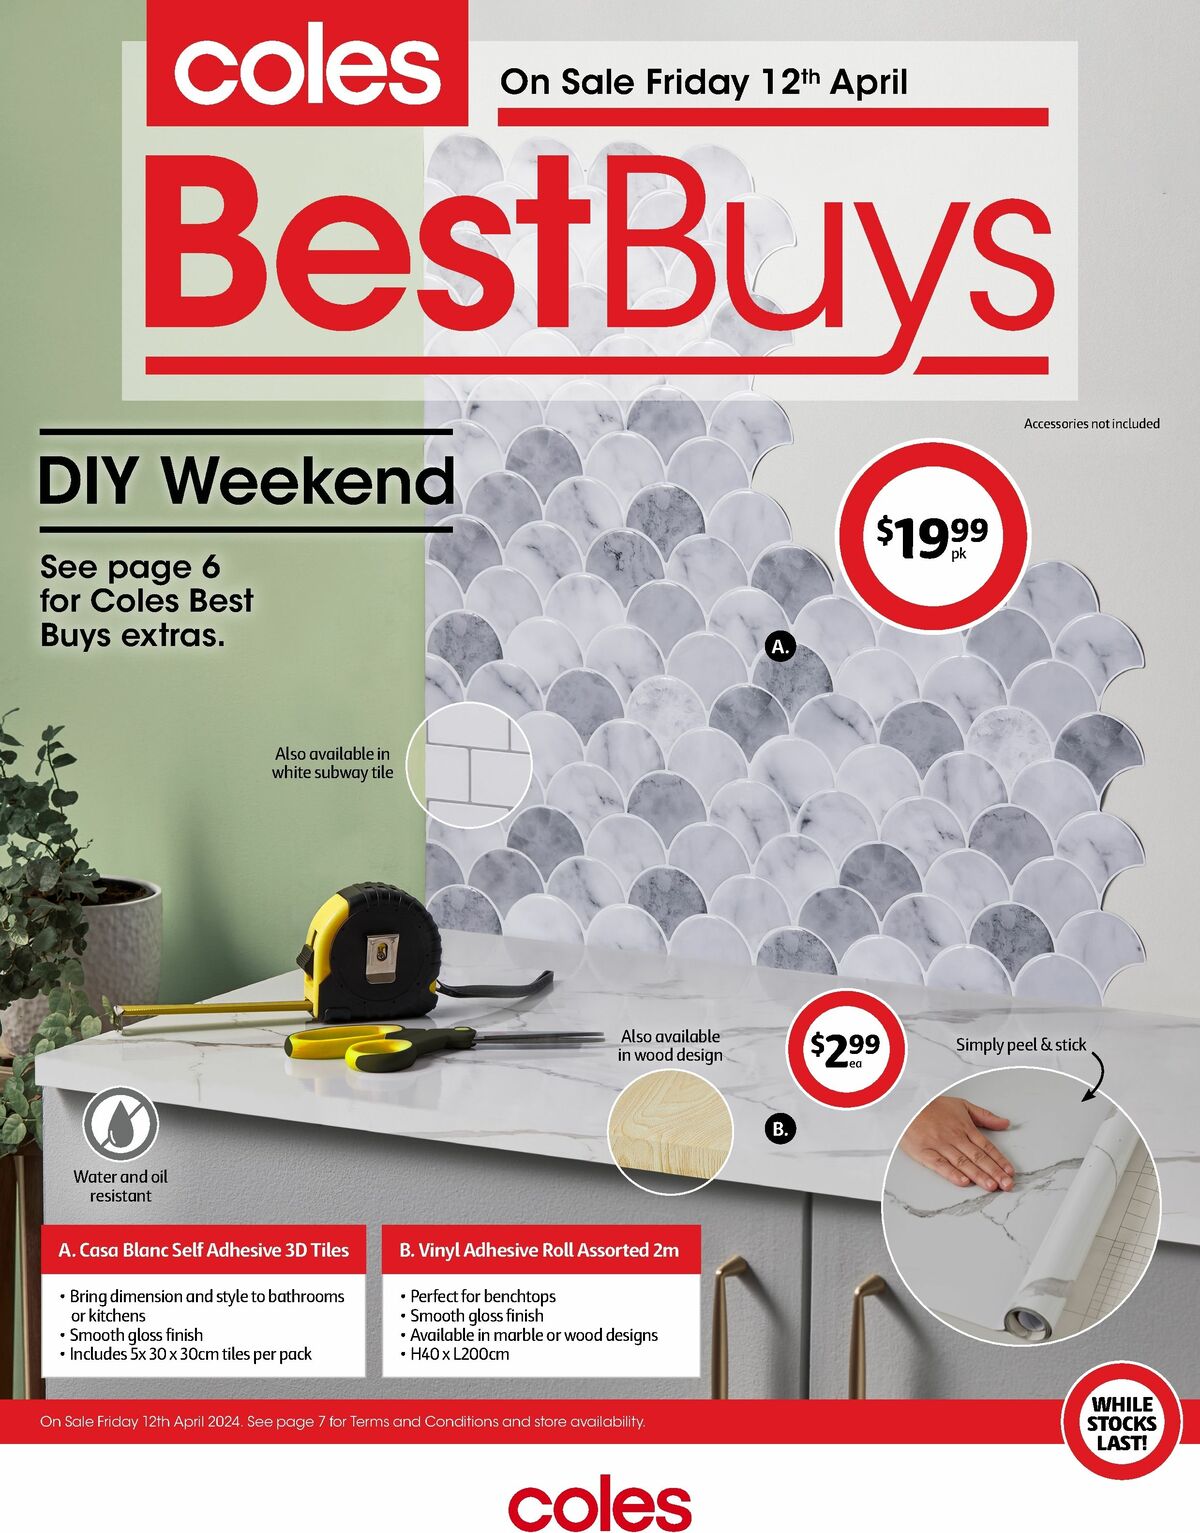 Coles Best Buys - DIY Weekend Catalogues from 12 April